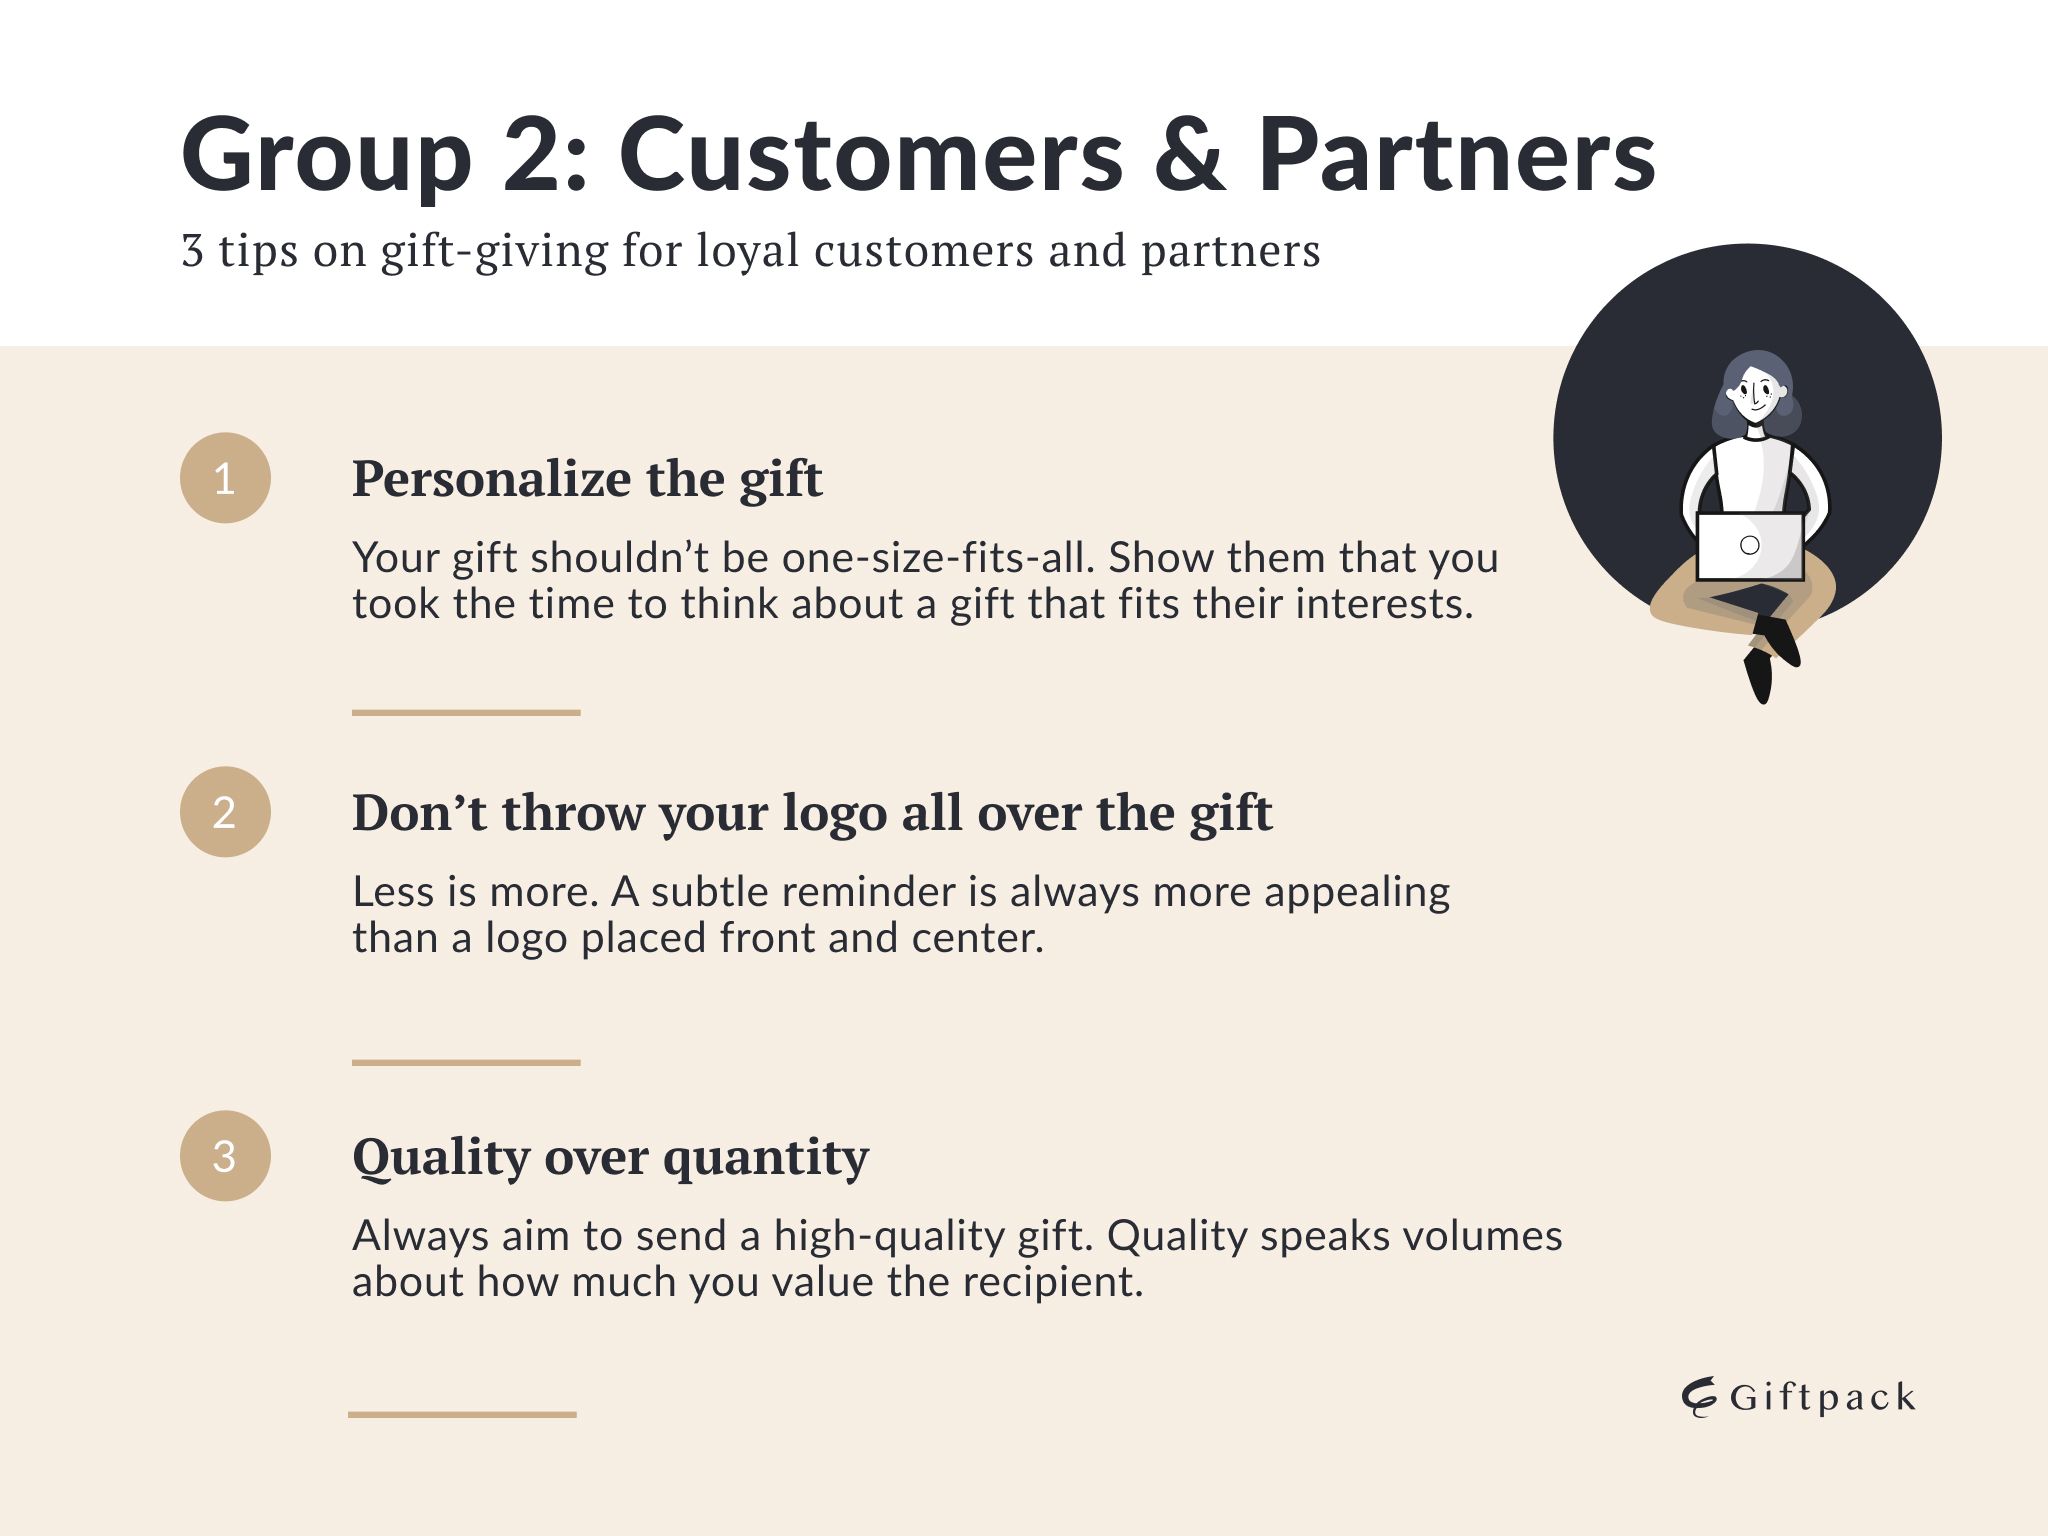 group 2 and tips for gifting to customers and partners